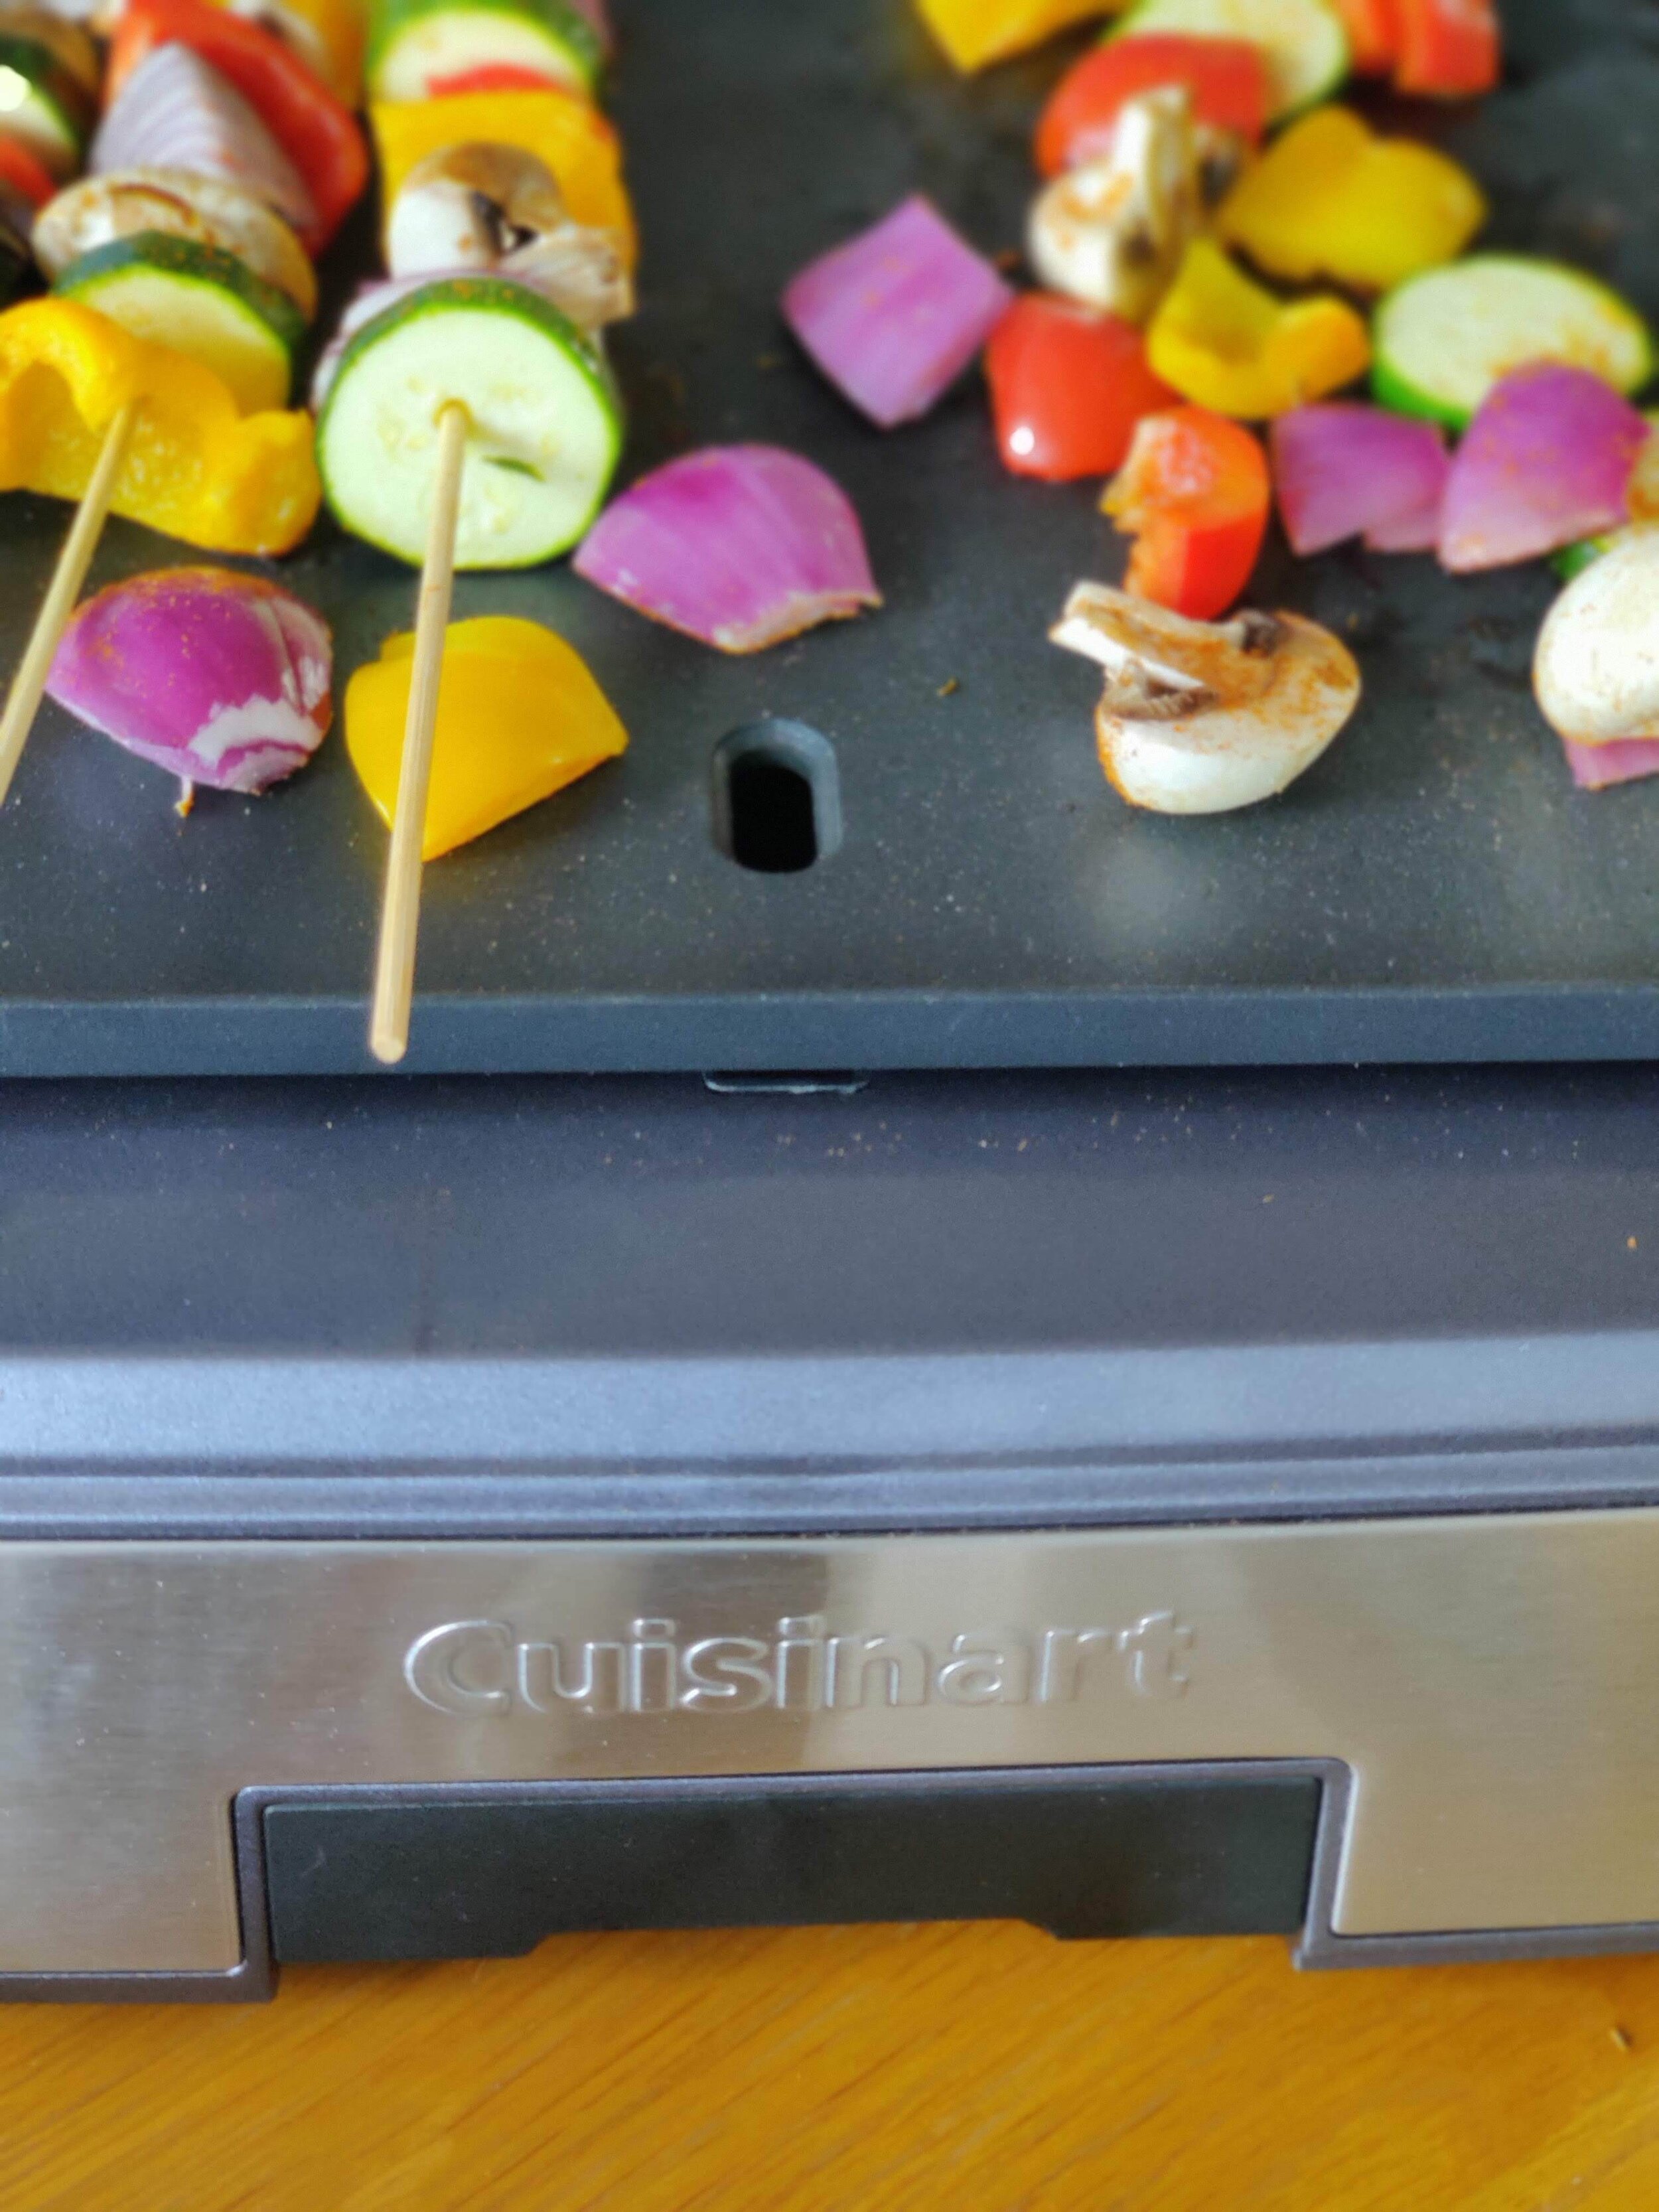 Cuisinart entertaining grill review